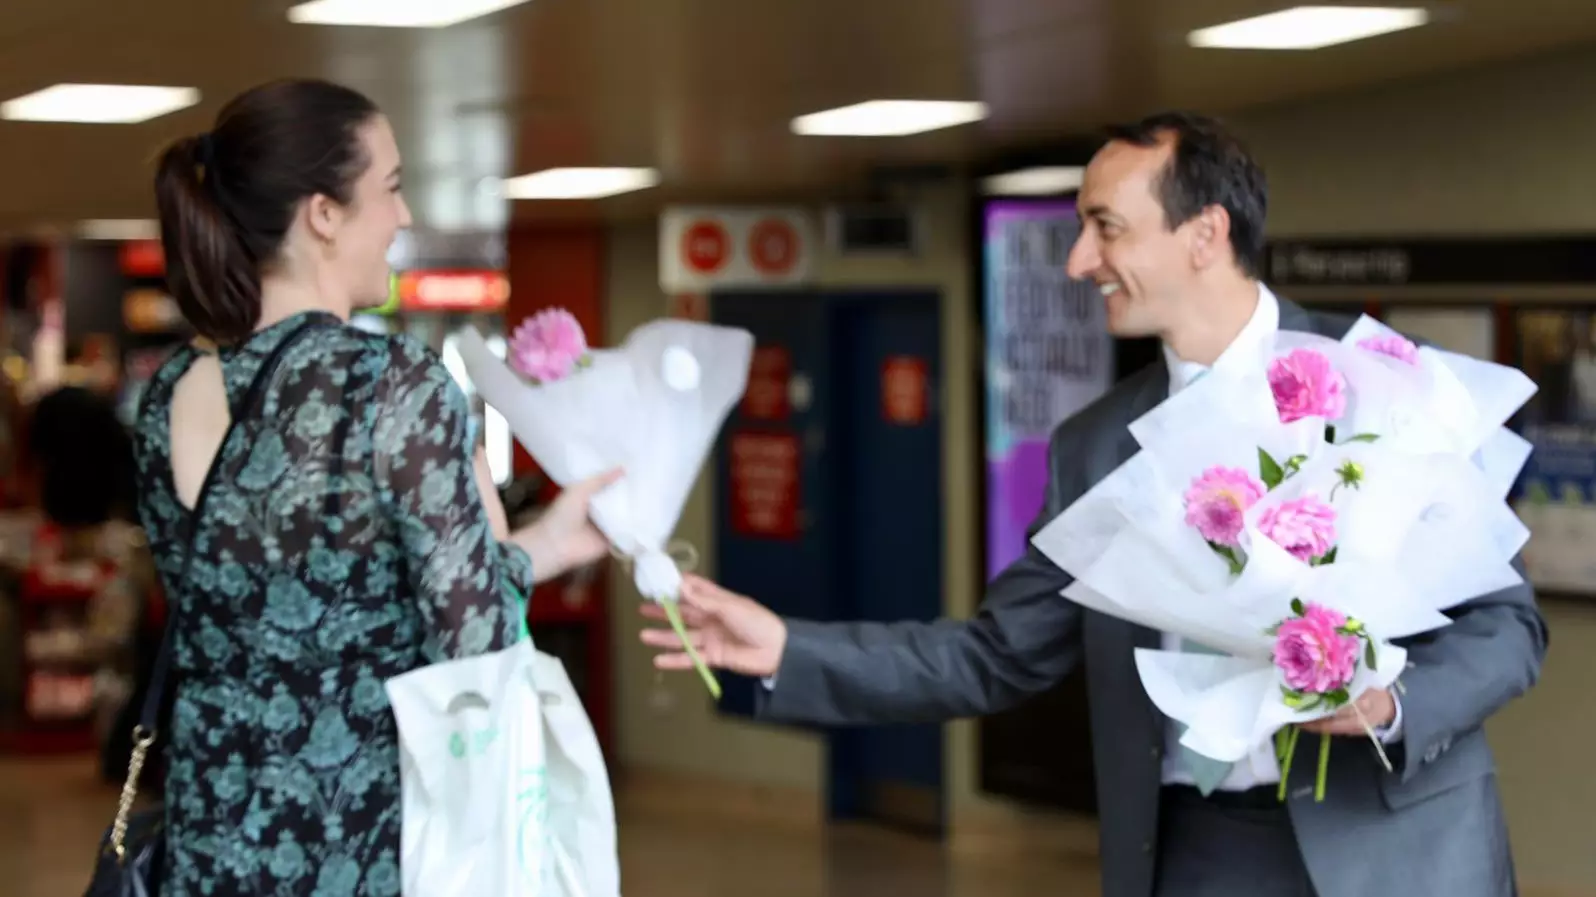 Aussie Politician Criticised For Handing Out Flowers On International Women's Day